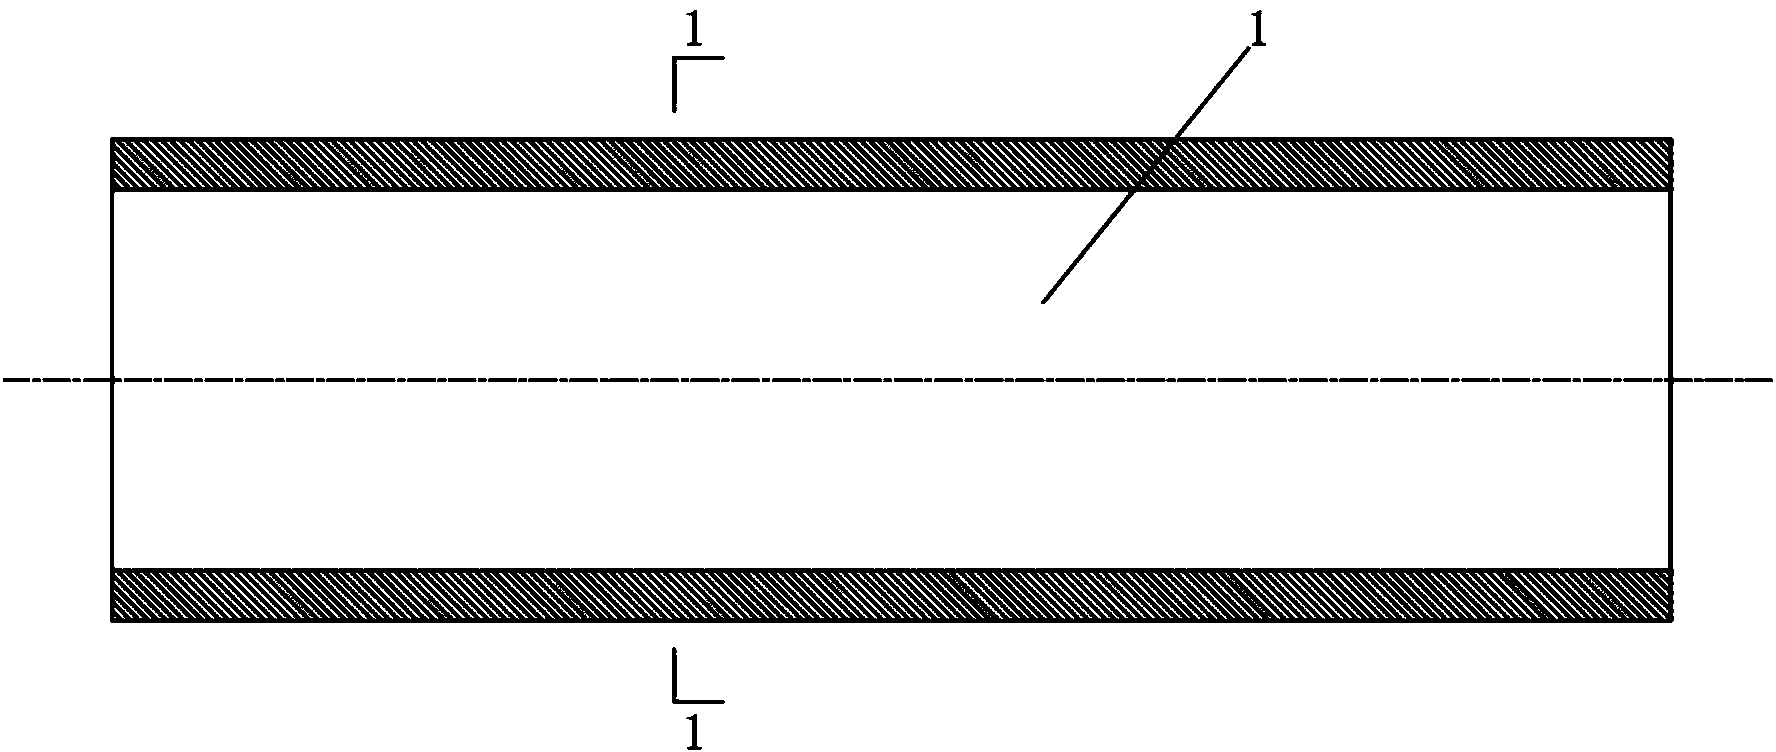 Glass fiber reinforced plastic prestressed concrete cylinder pipe (PCCP) and manufacturing method thereof